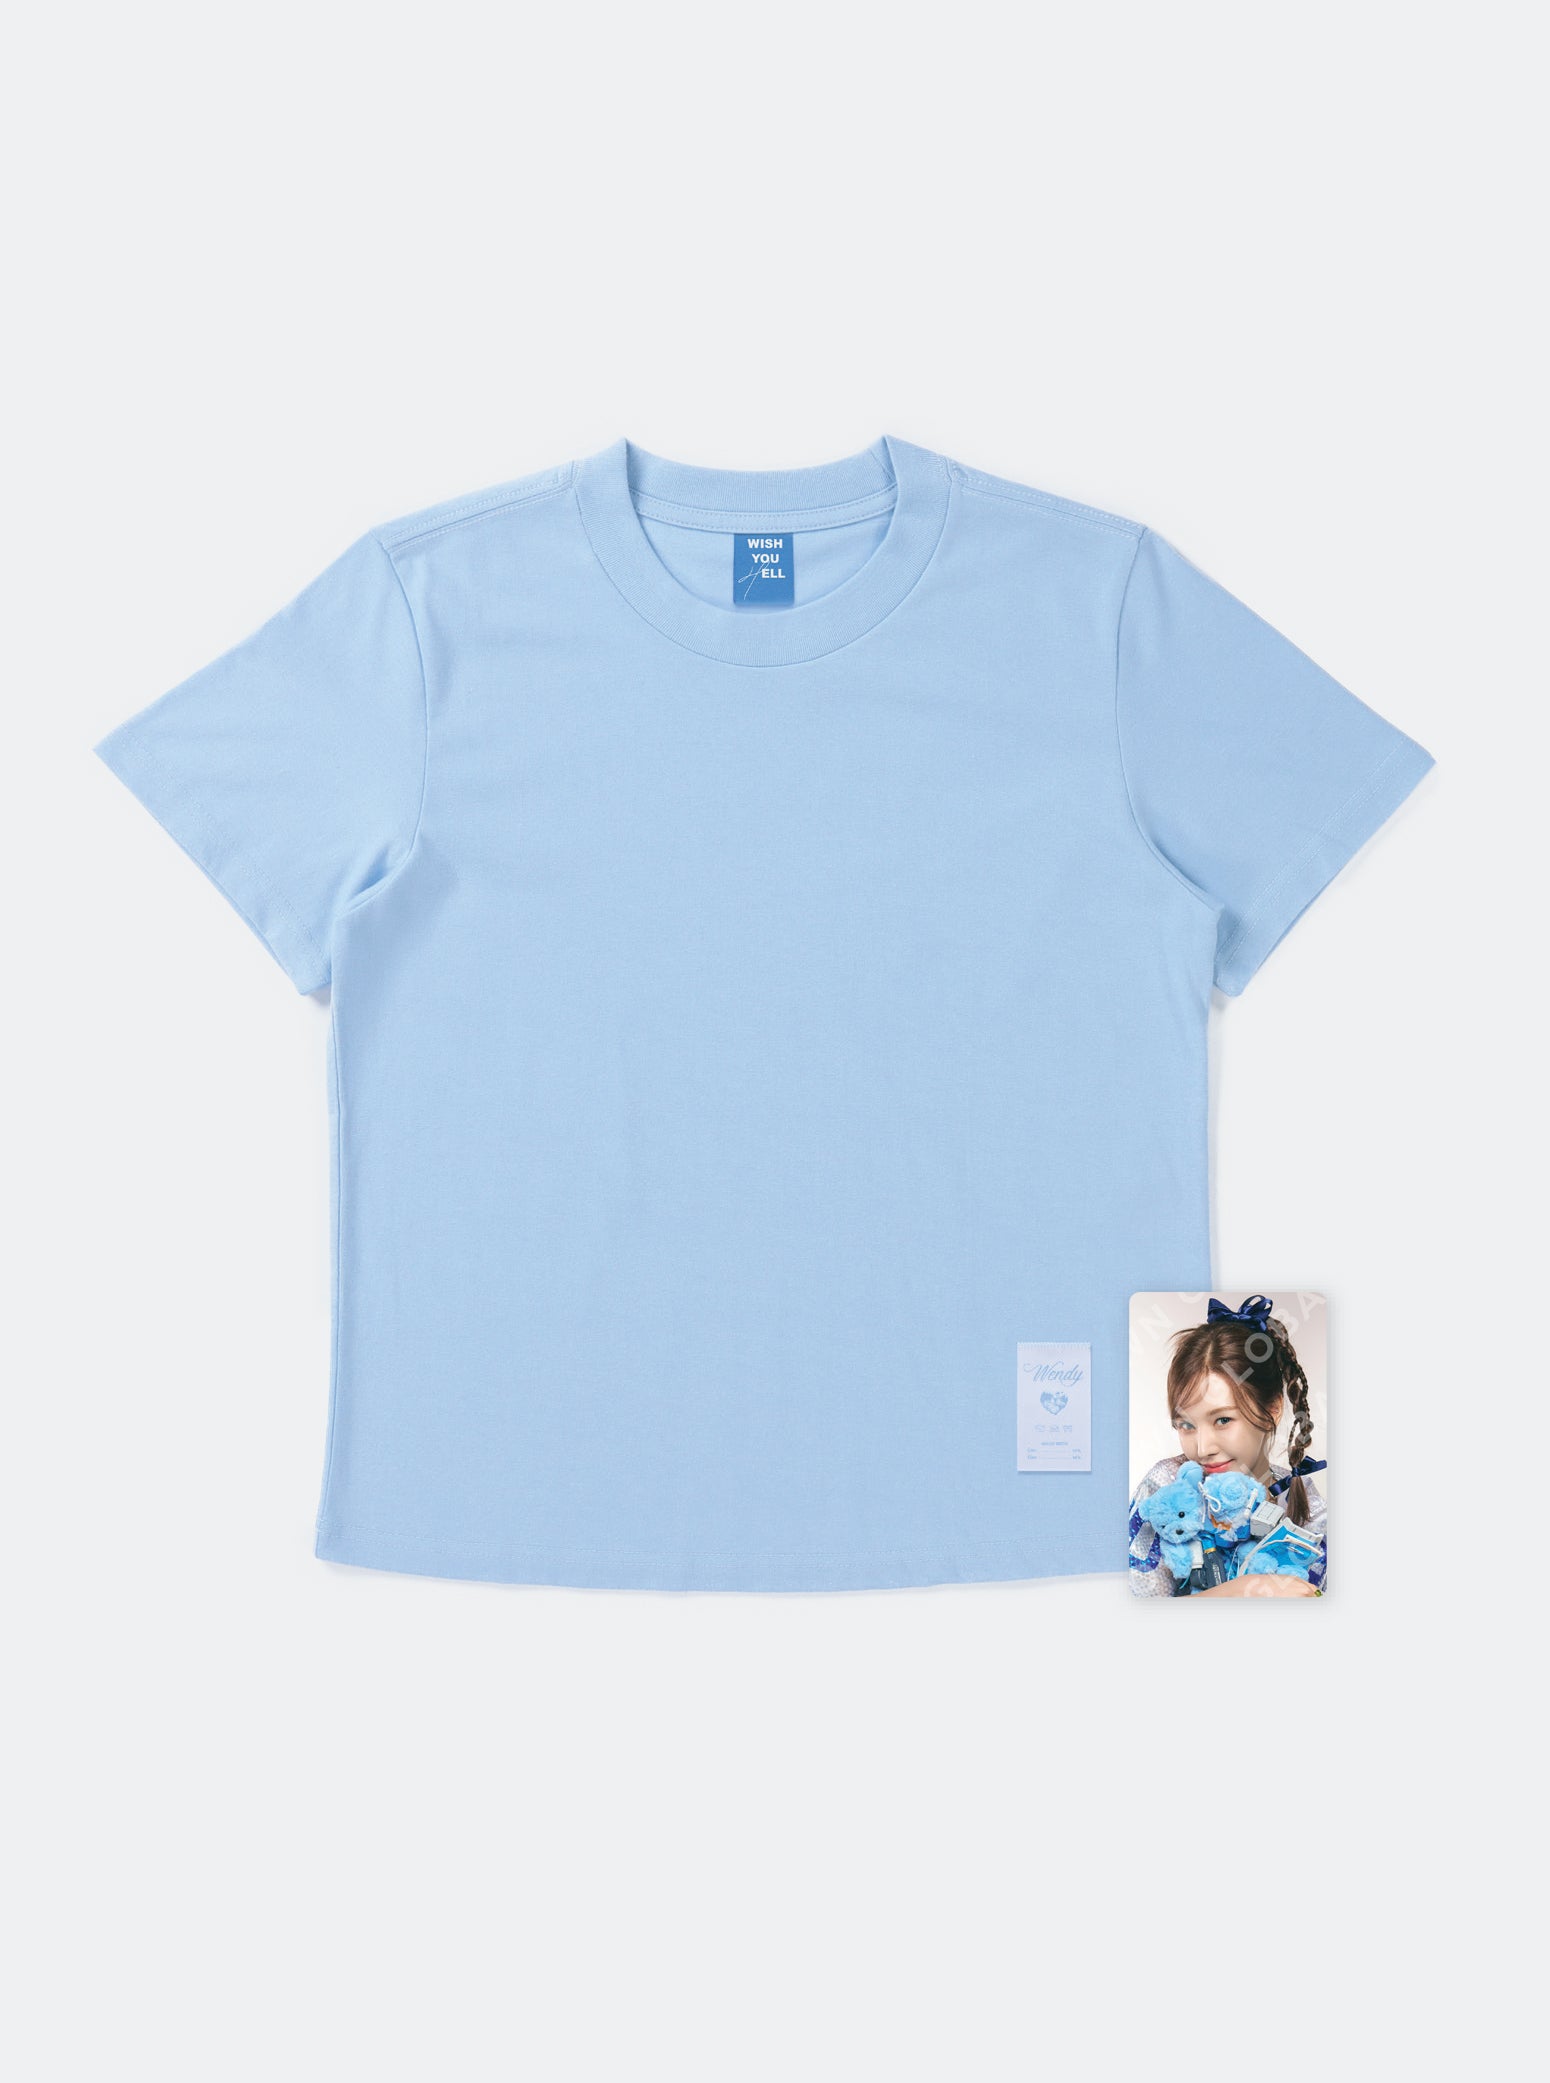 T-SHIRT SET - WENDY 'Wish You Hell - The 2nd Mini Album' MD